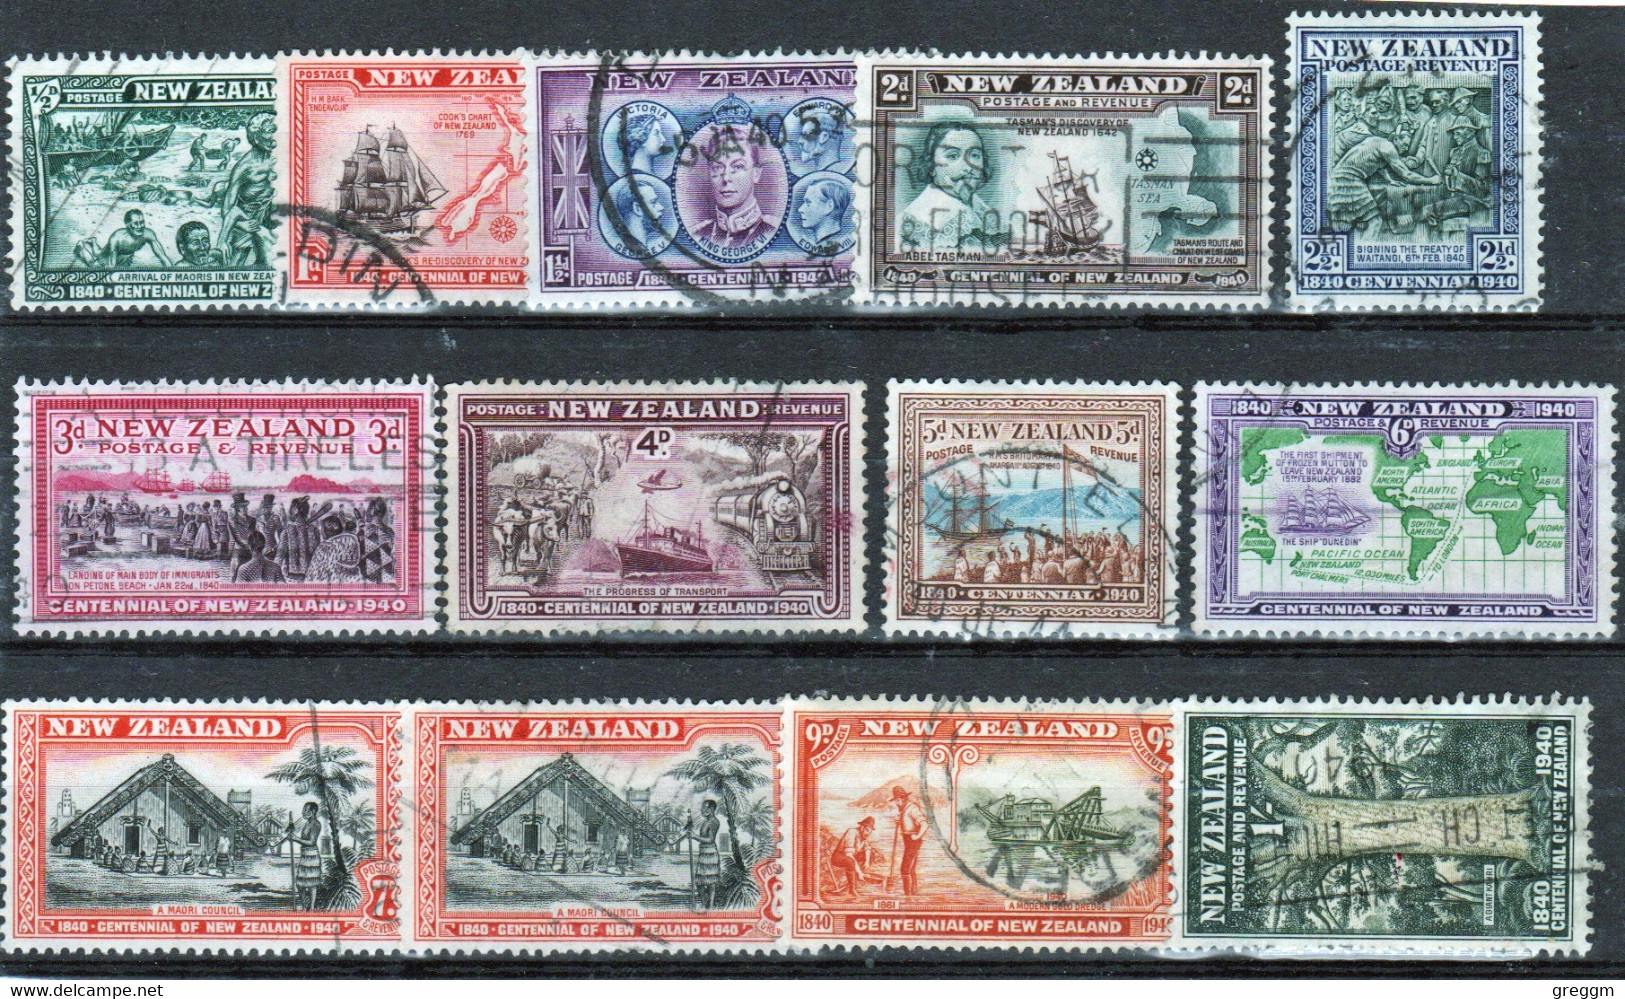 New Zealand Set Of Definitive Stamps From 1940 To Celebrate Centenary Of New Zealand In Fine Used Condition. - Oblitérés